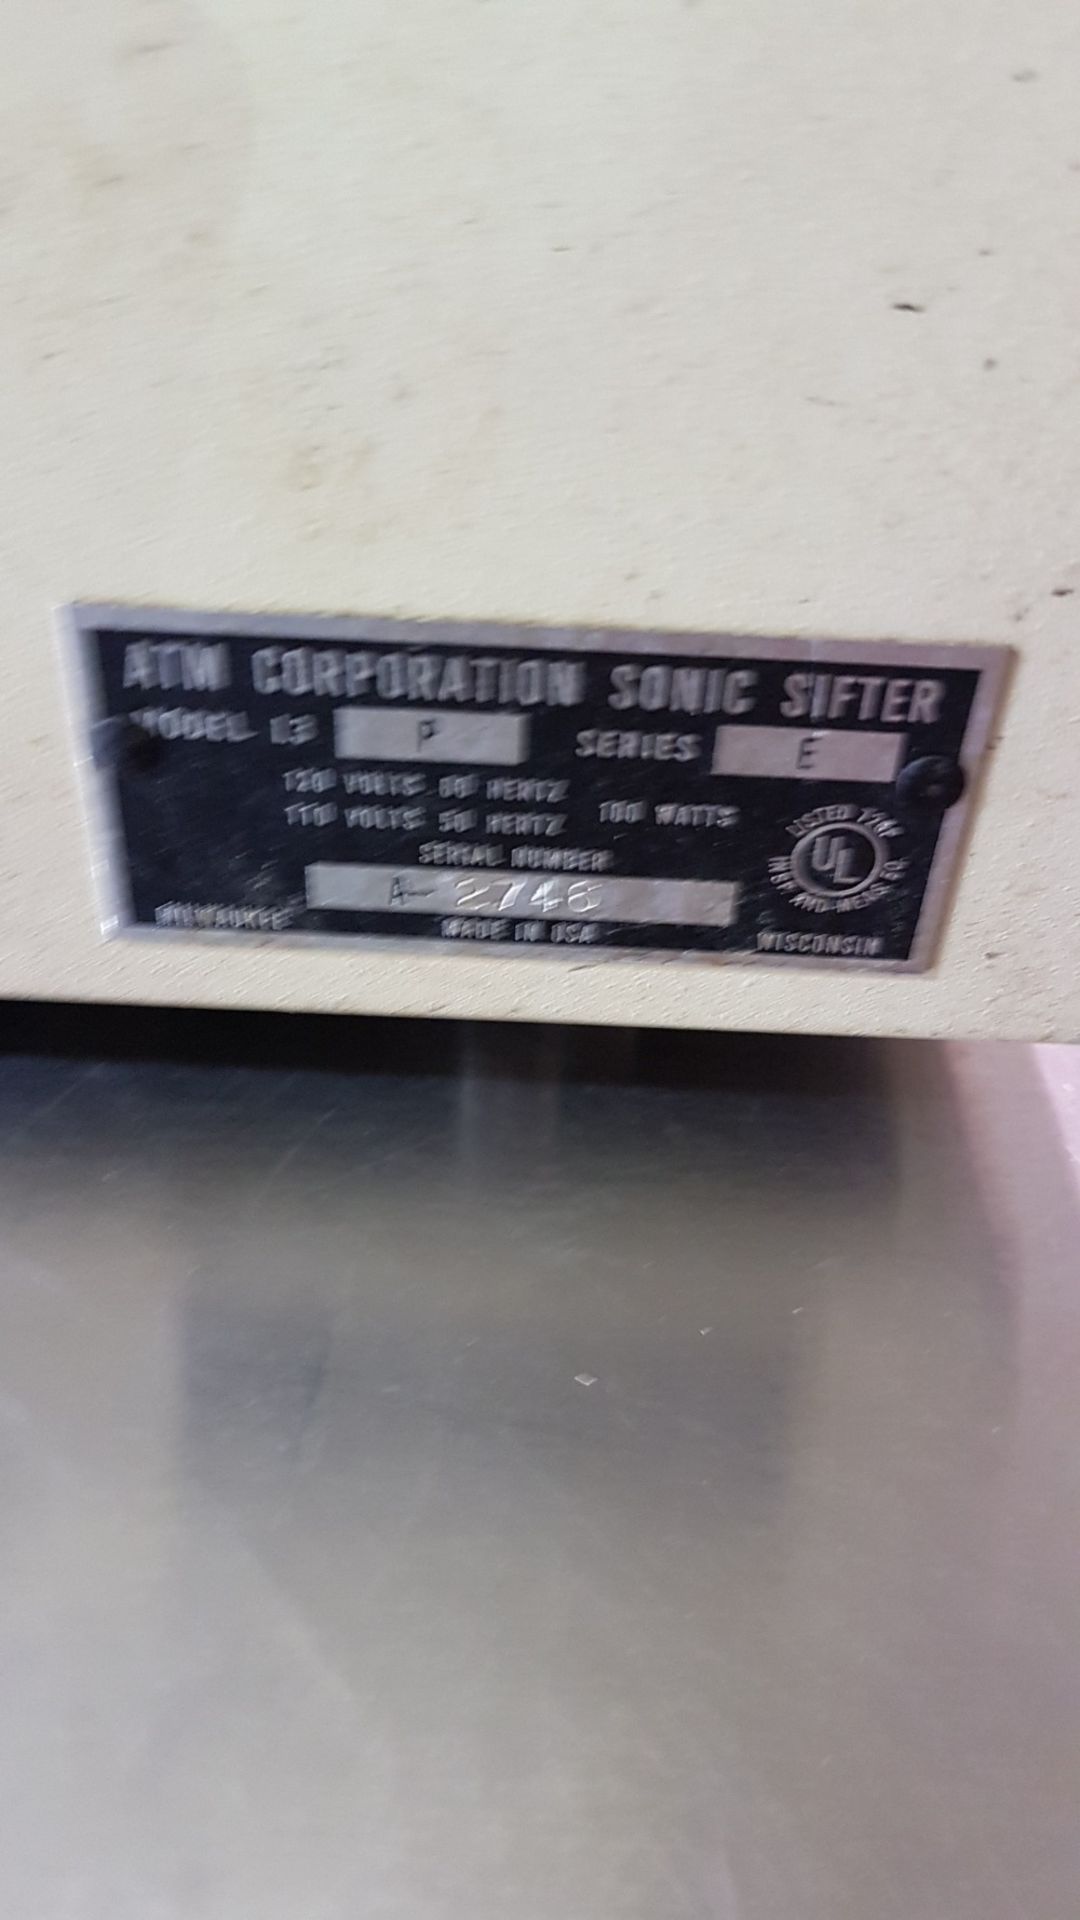 ATM Sonic Sifter, model P - Image 5 of 5